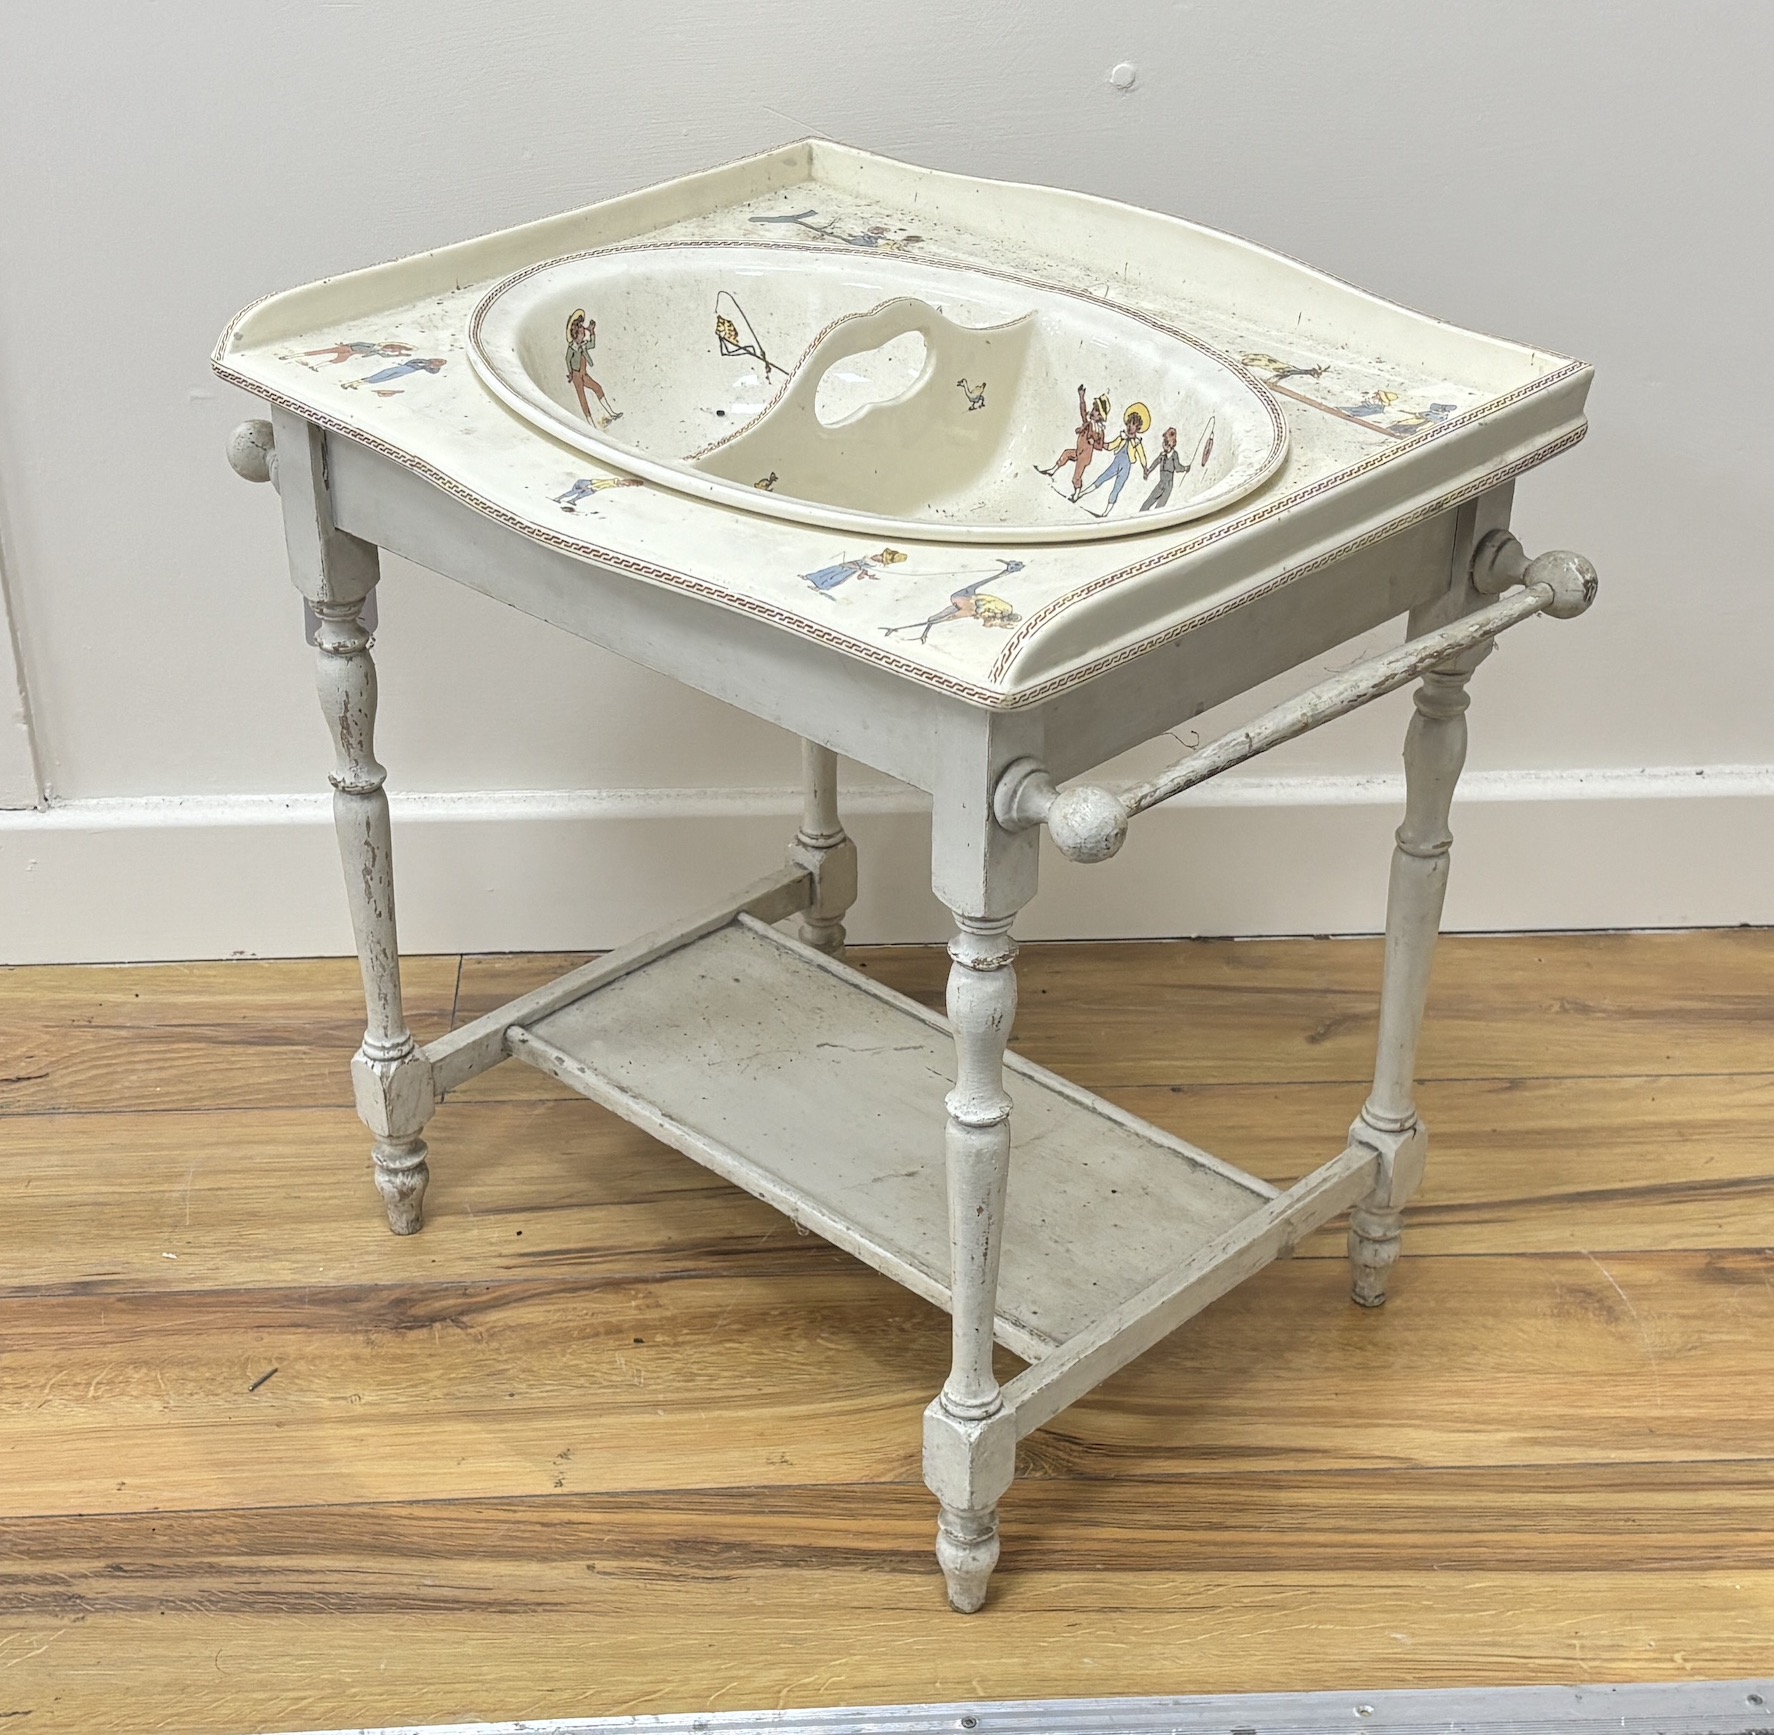 A French Sarreguemines pottery child's basin decorated with nursery scenes and matching wash stand, 51 x 37 x 48cm